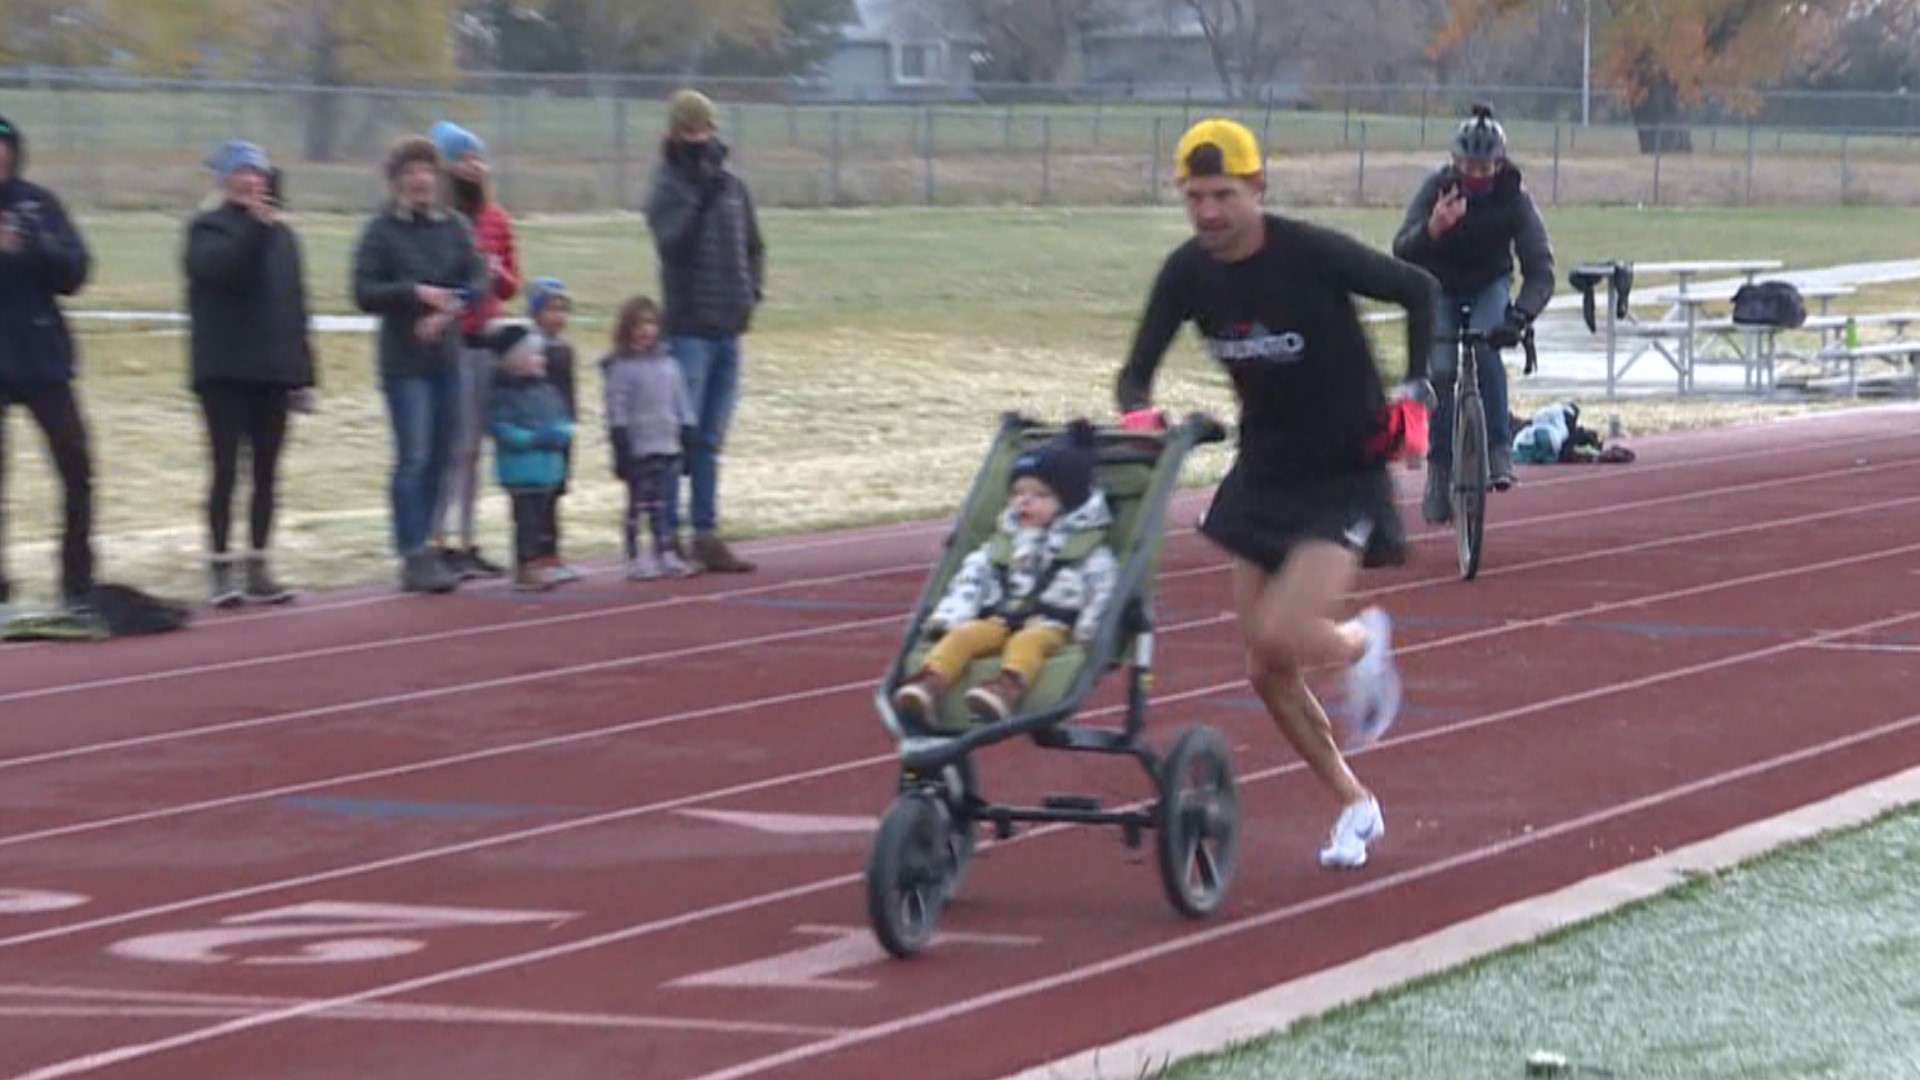 Andrew Vos clocked a 4:57:1 mile while pushing his 1-year-old son in a stroller.